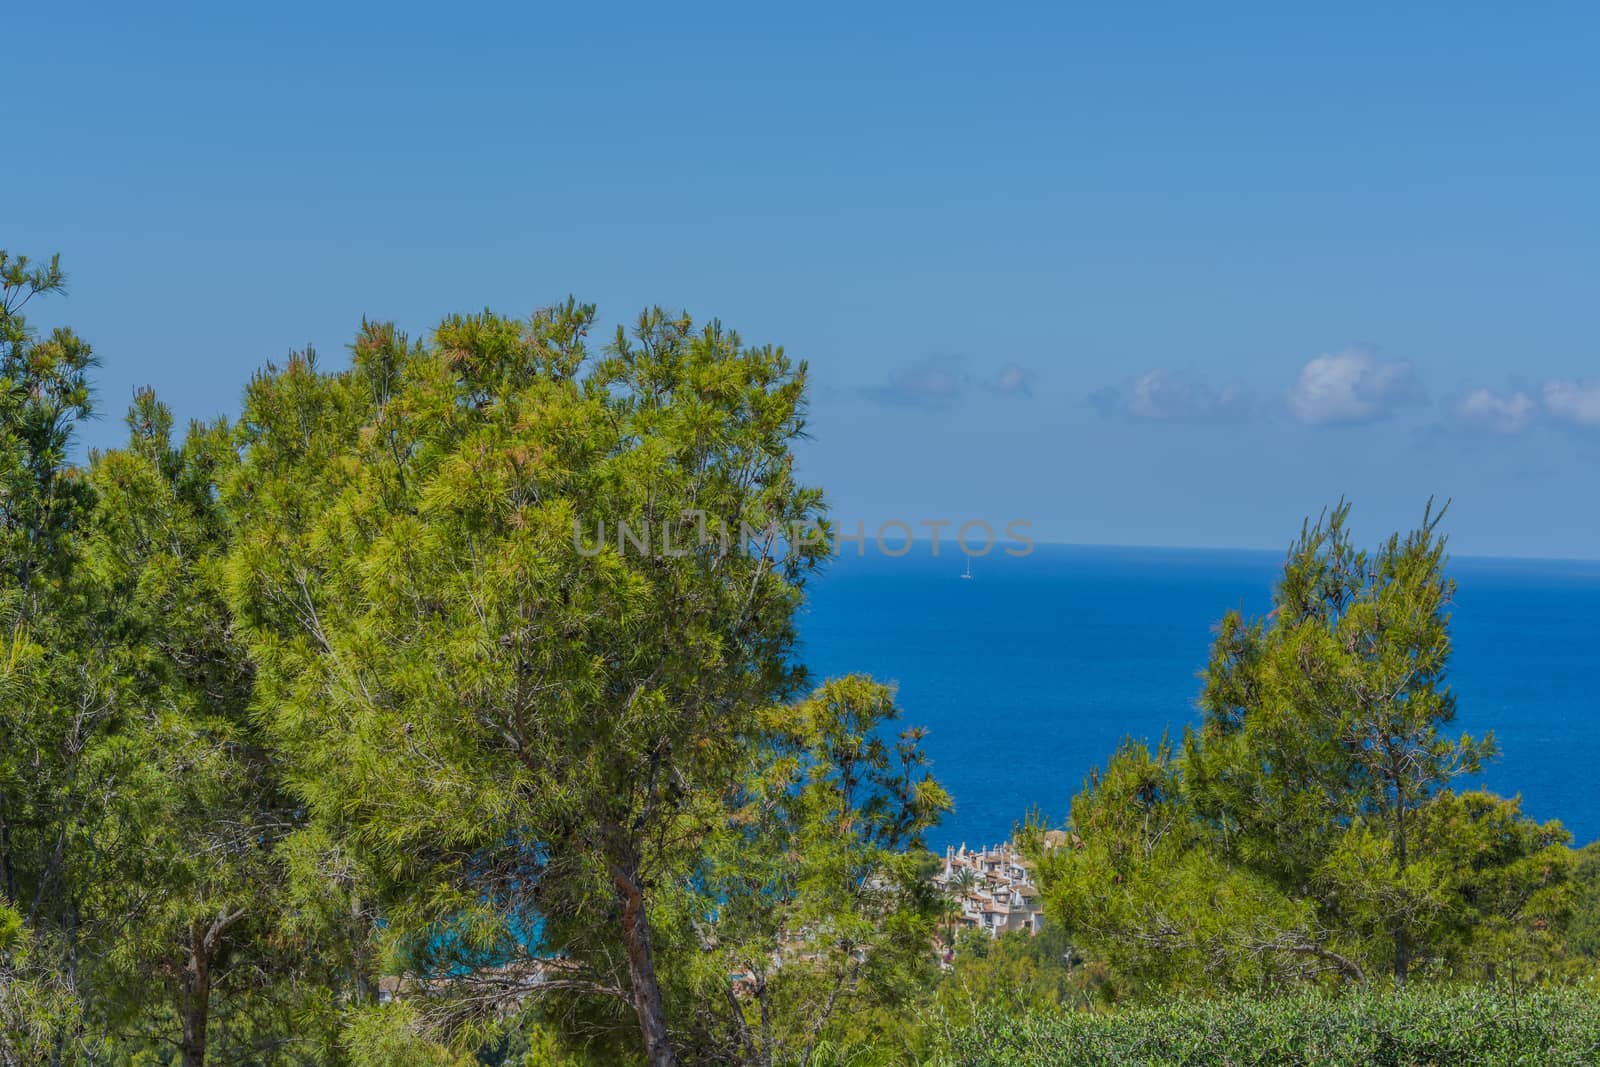 Panorama of the bay Paguera photographed from the mountain in Costa de la Calma.